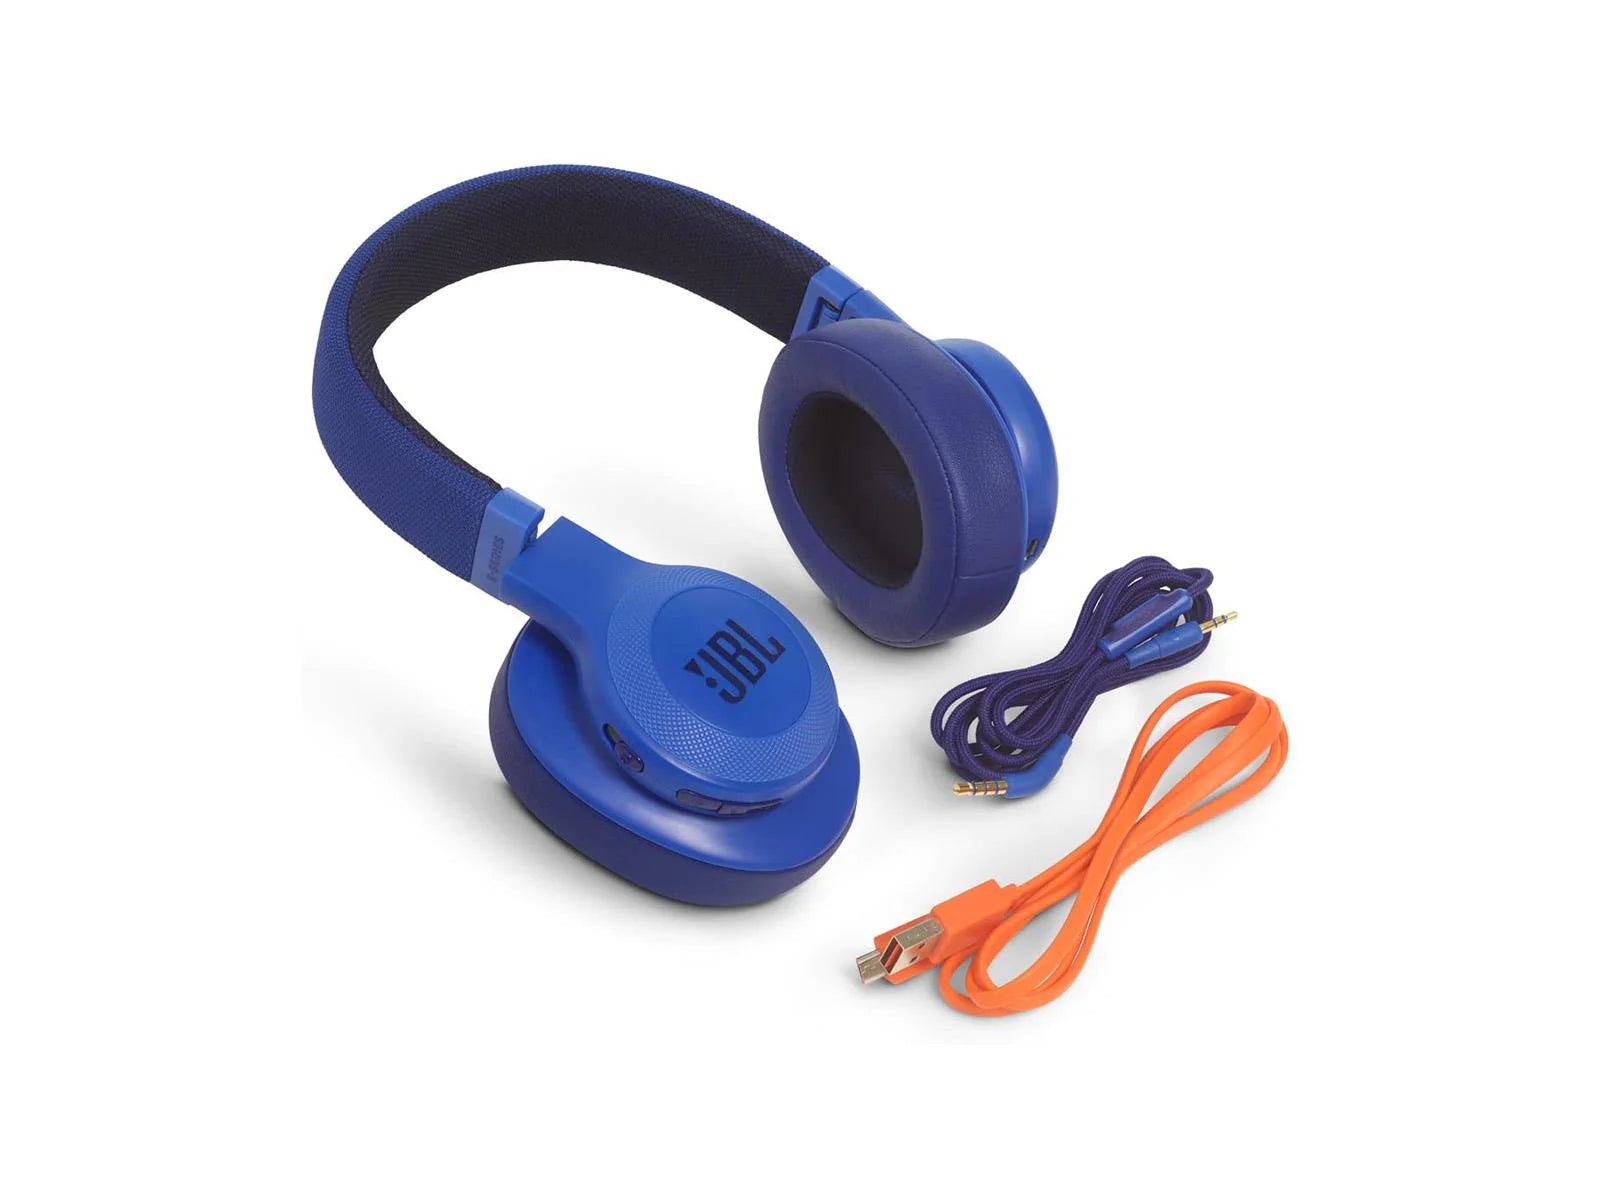 Picture of the JBL headphones orange charging cable and blue cable with buttons to control your headphones on the white background